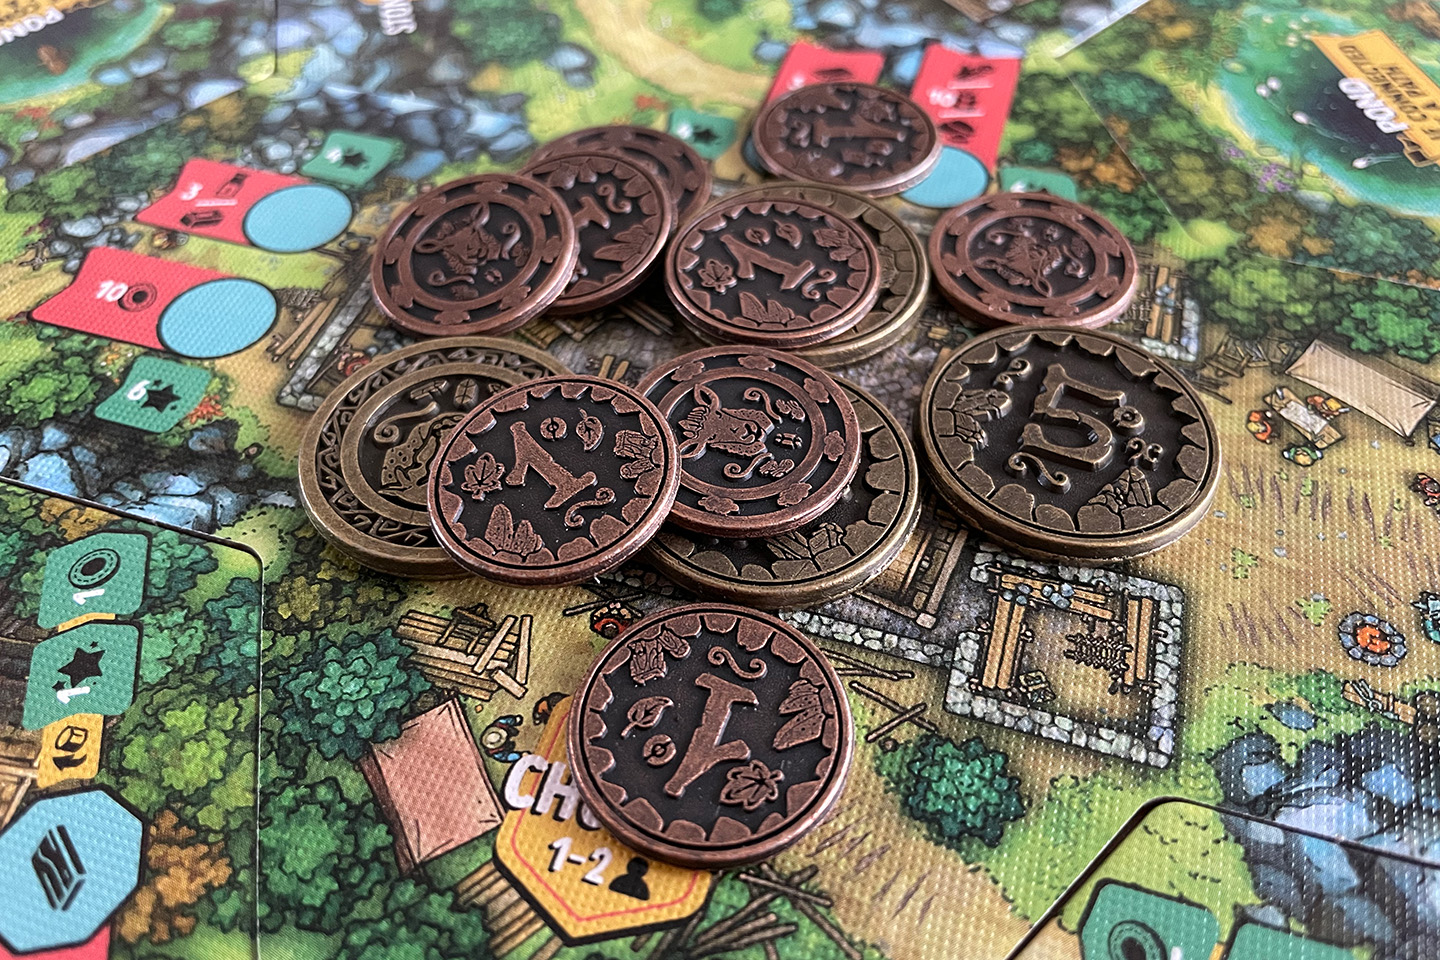 These metal coins are one of my favorite parts of the game.